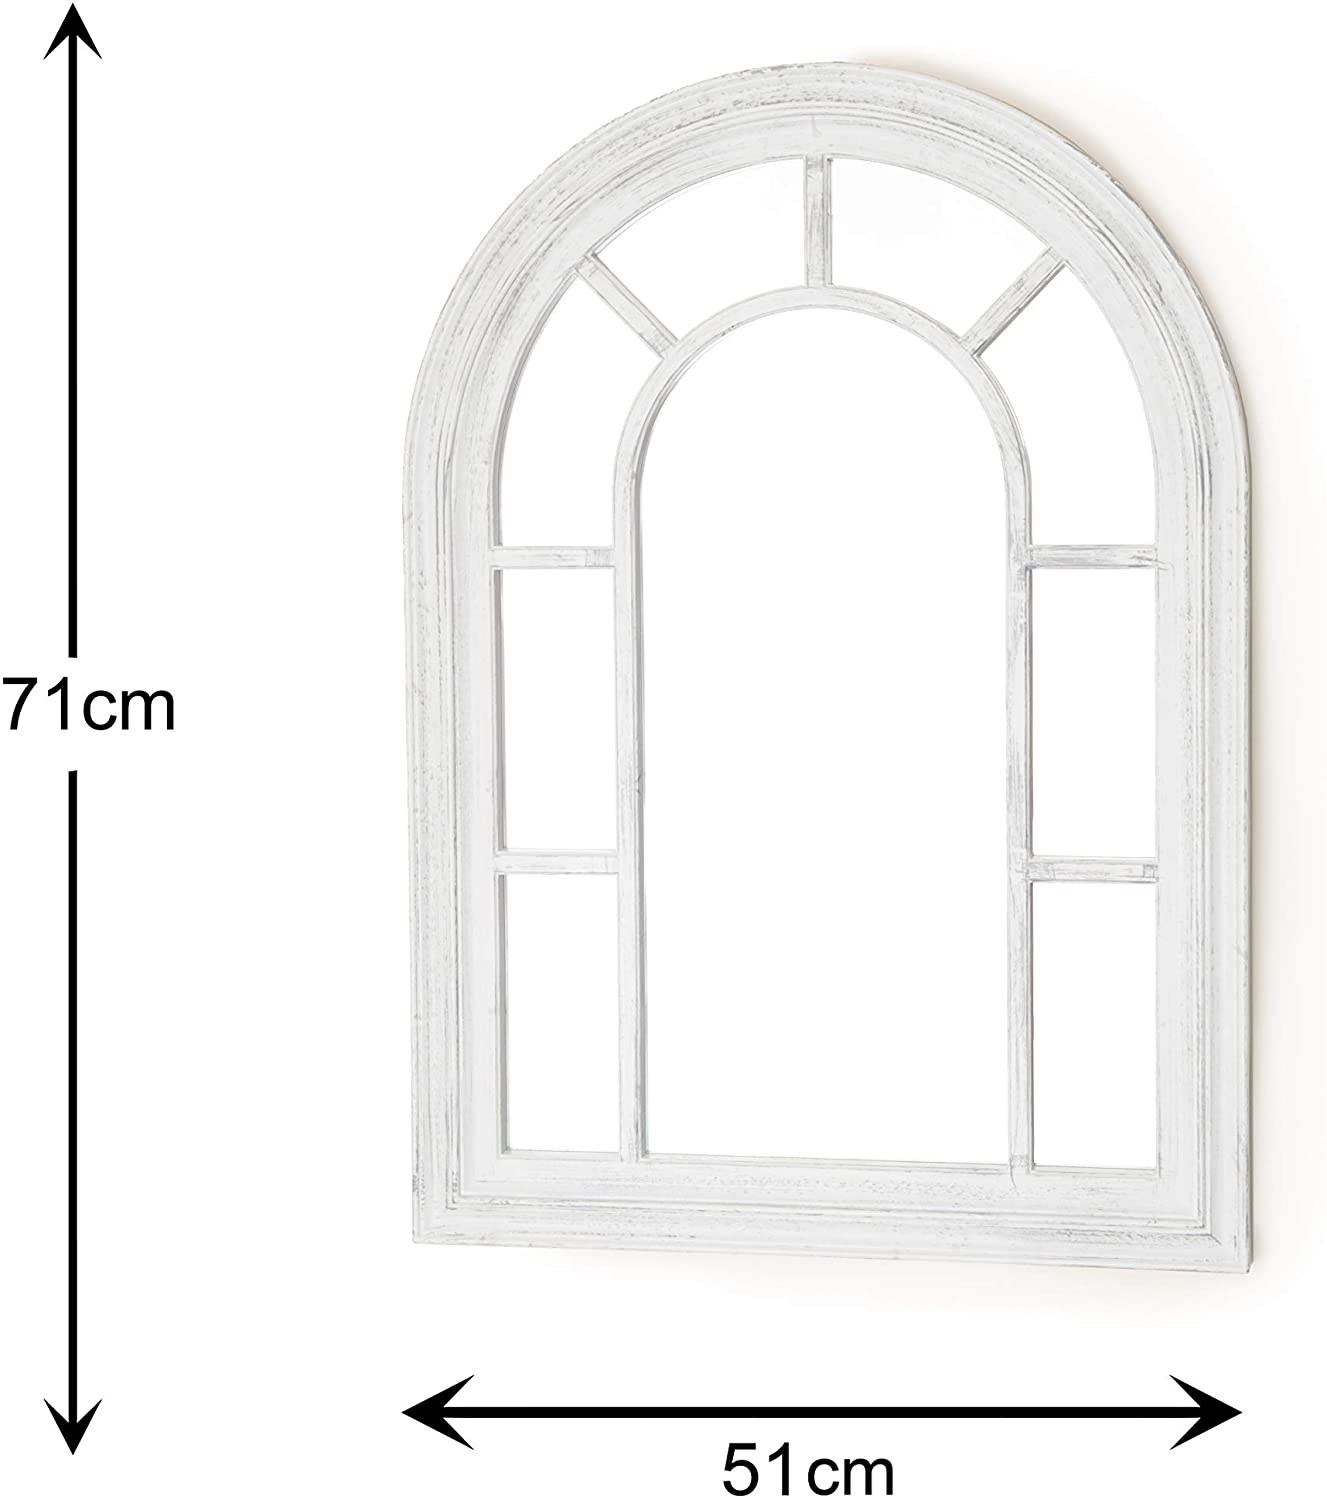 2ft 6in x 1ft 8in Florence Wall Mirror by Creekwood™